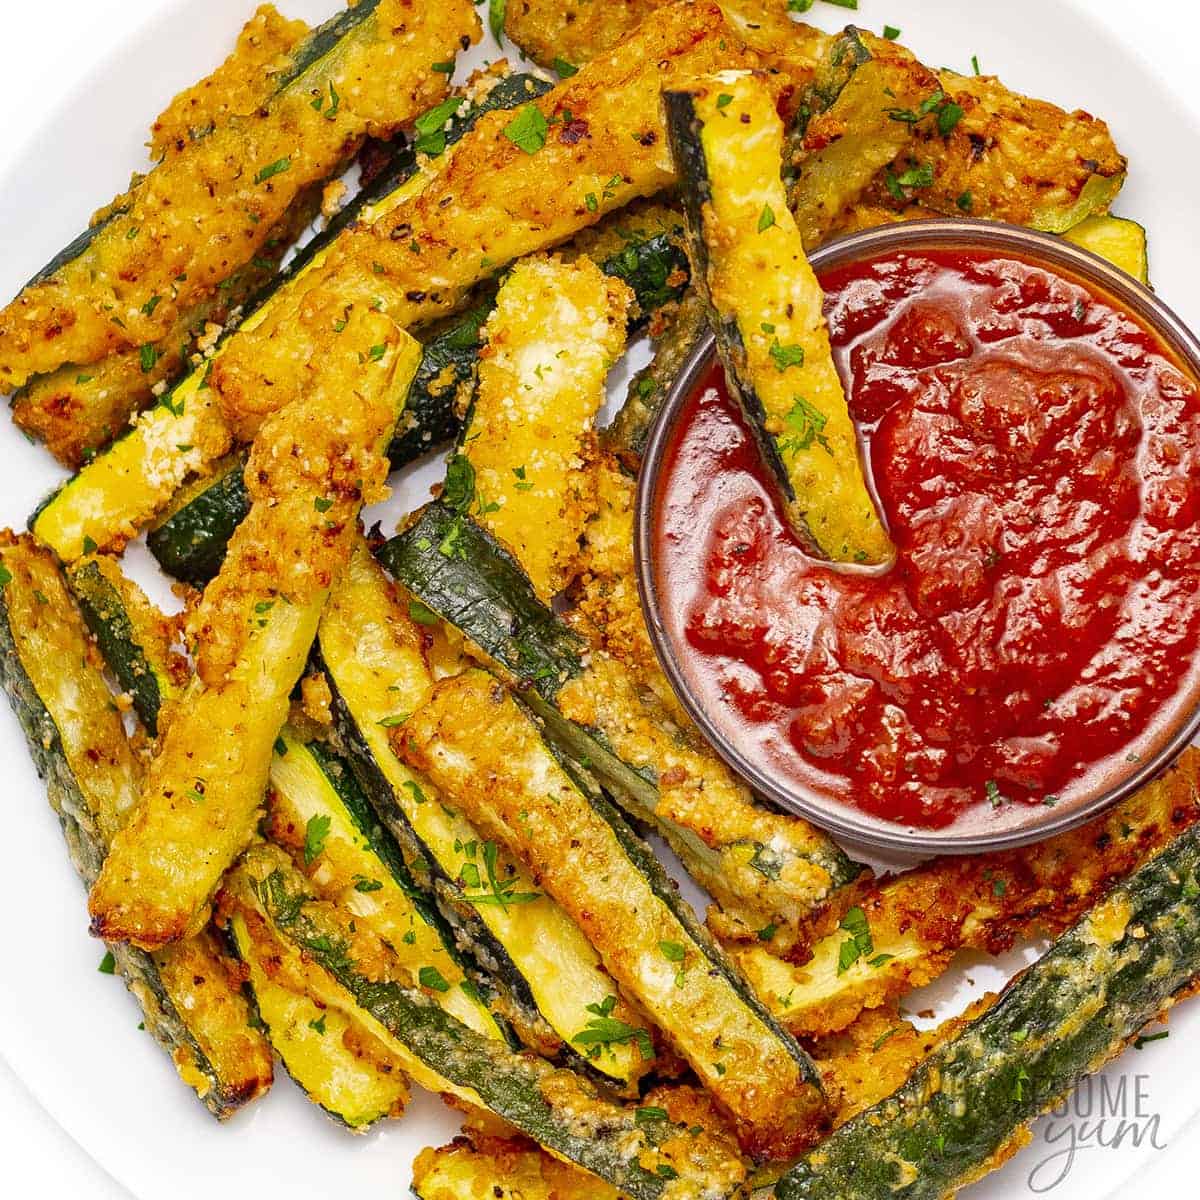 Baked Zucchini Fries Recipe (Easy & Healthy!) - Wholesome Yum